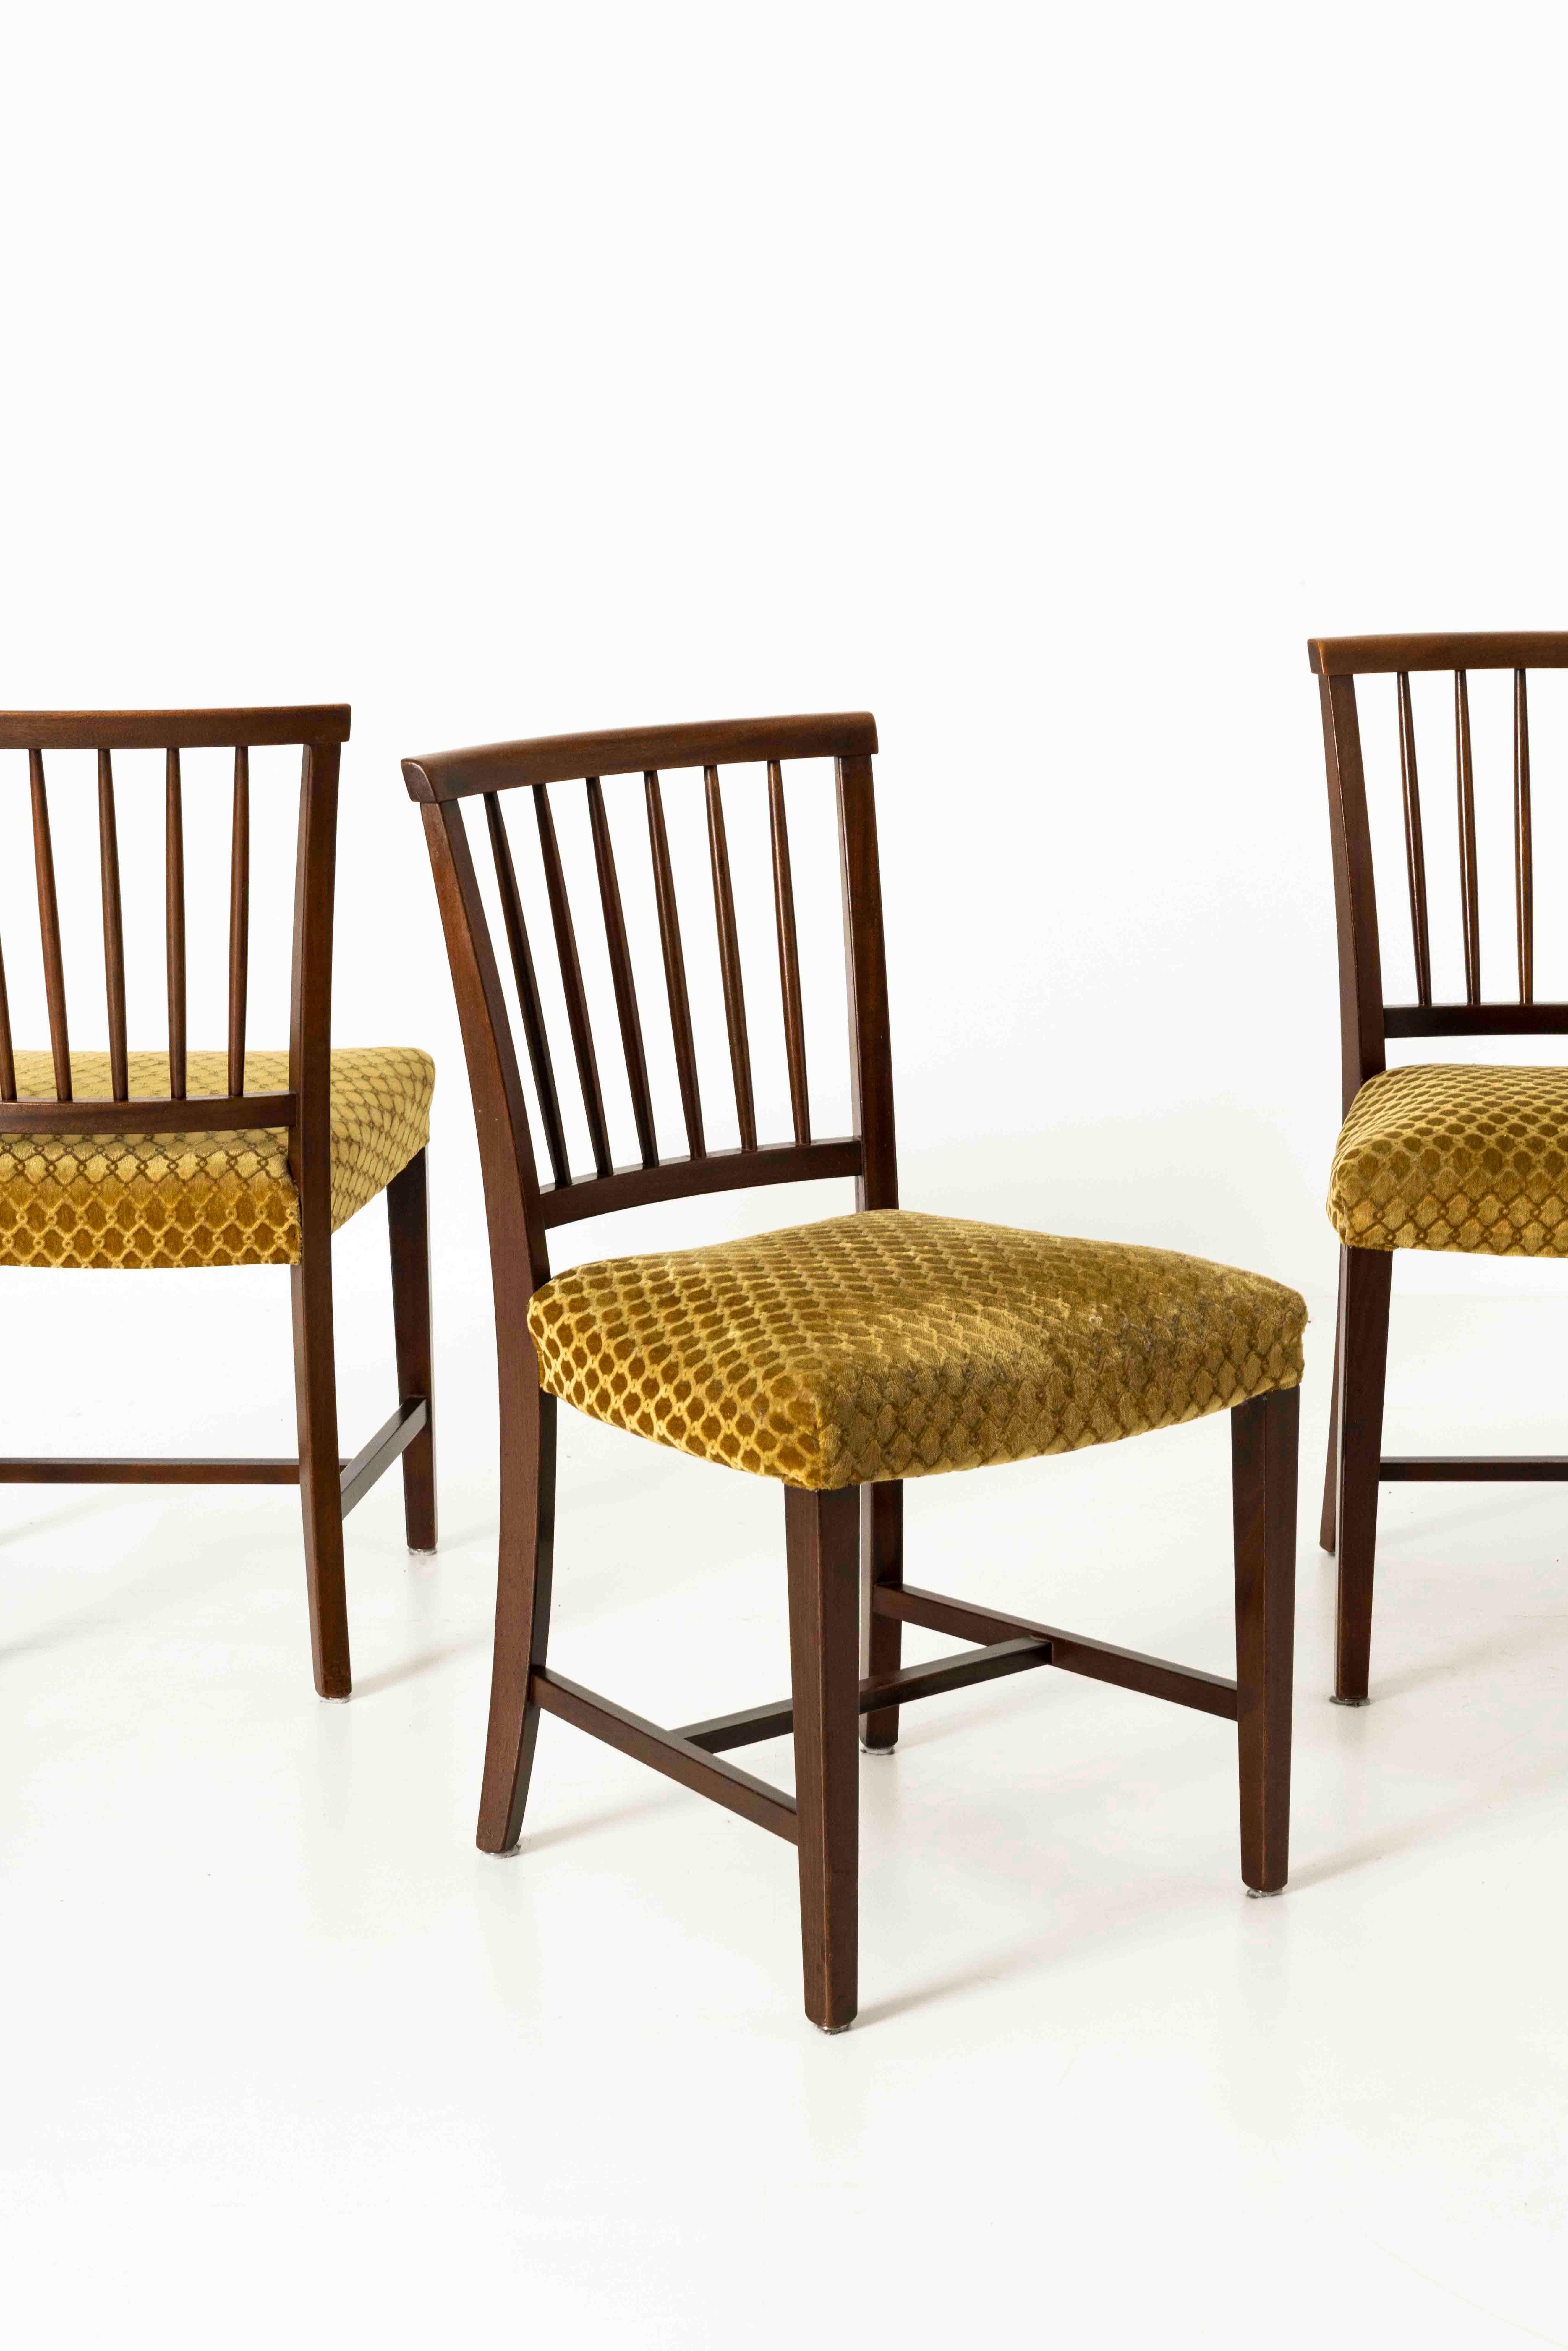 Set of Four Vintage Dining Chairs in Wood and Ocher Yellow Fabric, Ca 1960s For Sale 2